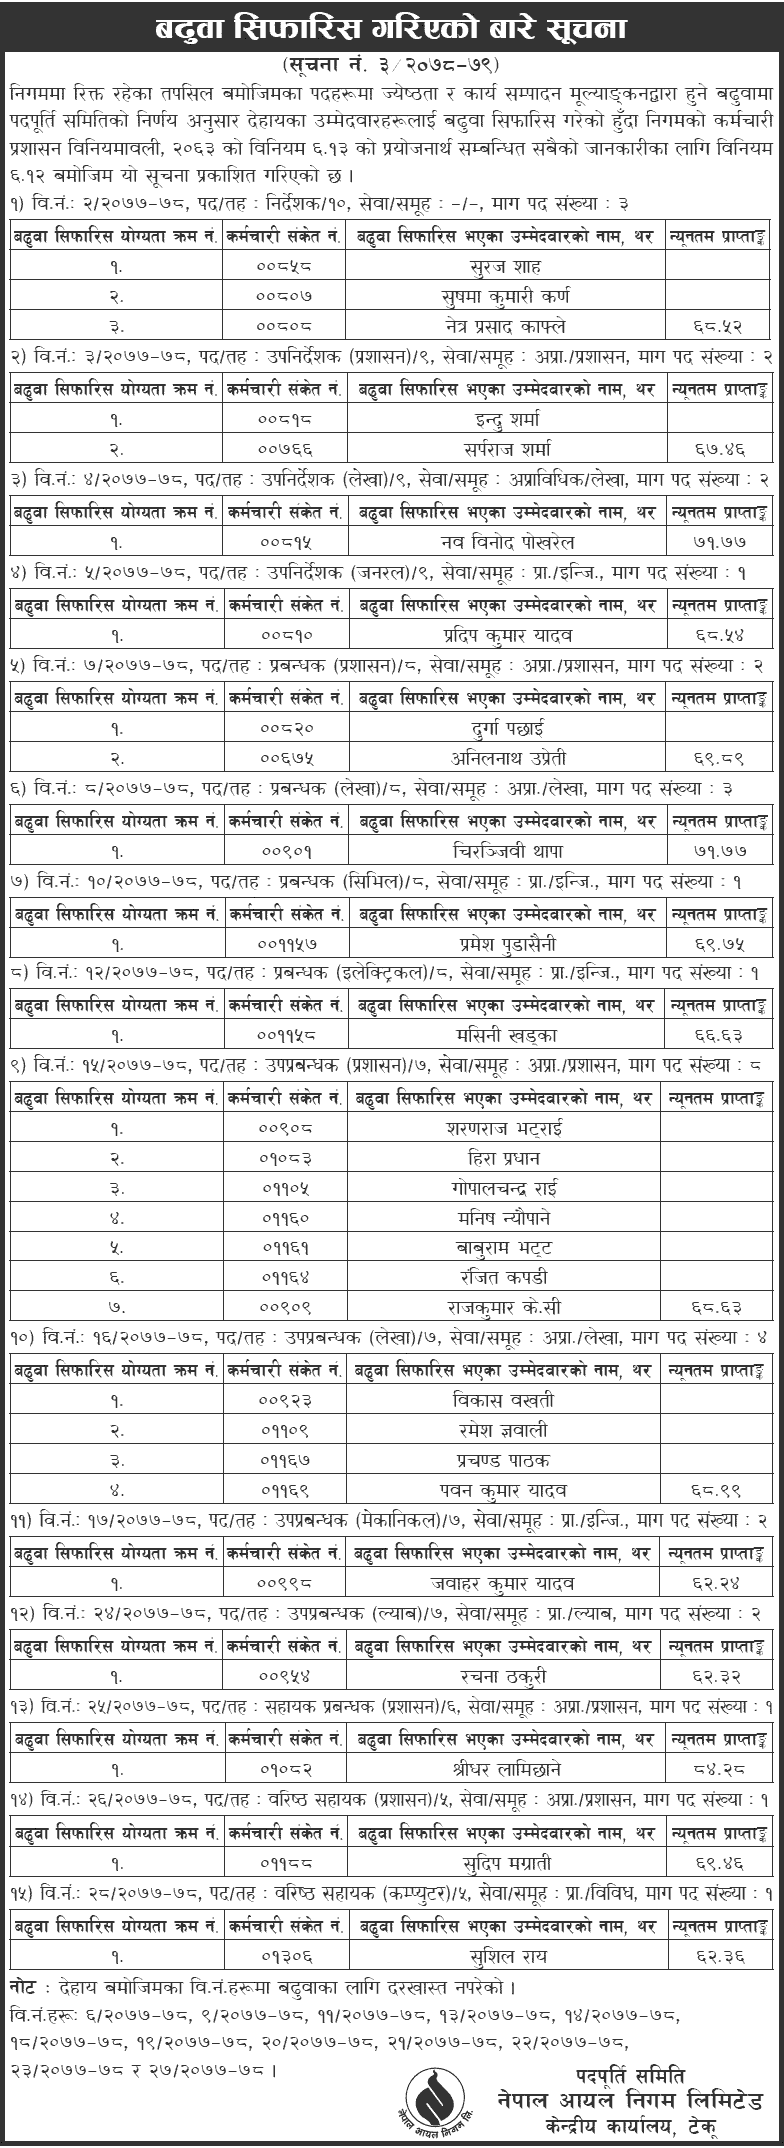 Nepal Oil Nigam (NOC) Published Promotion List of Employees